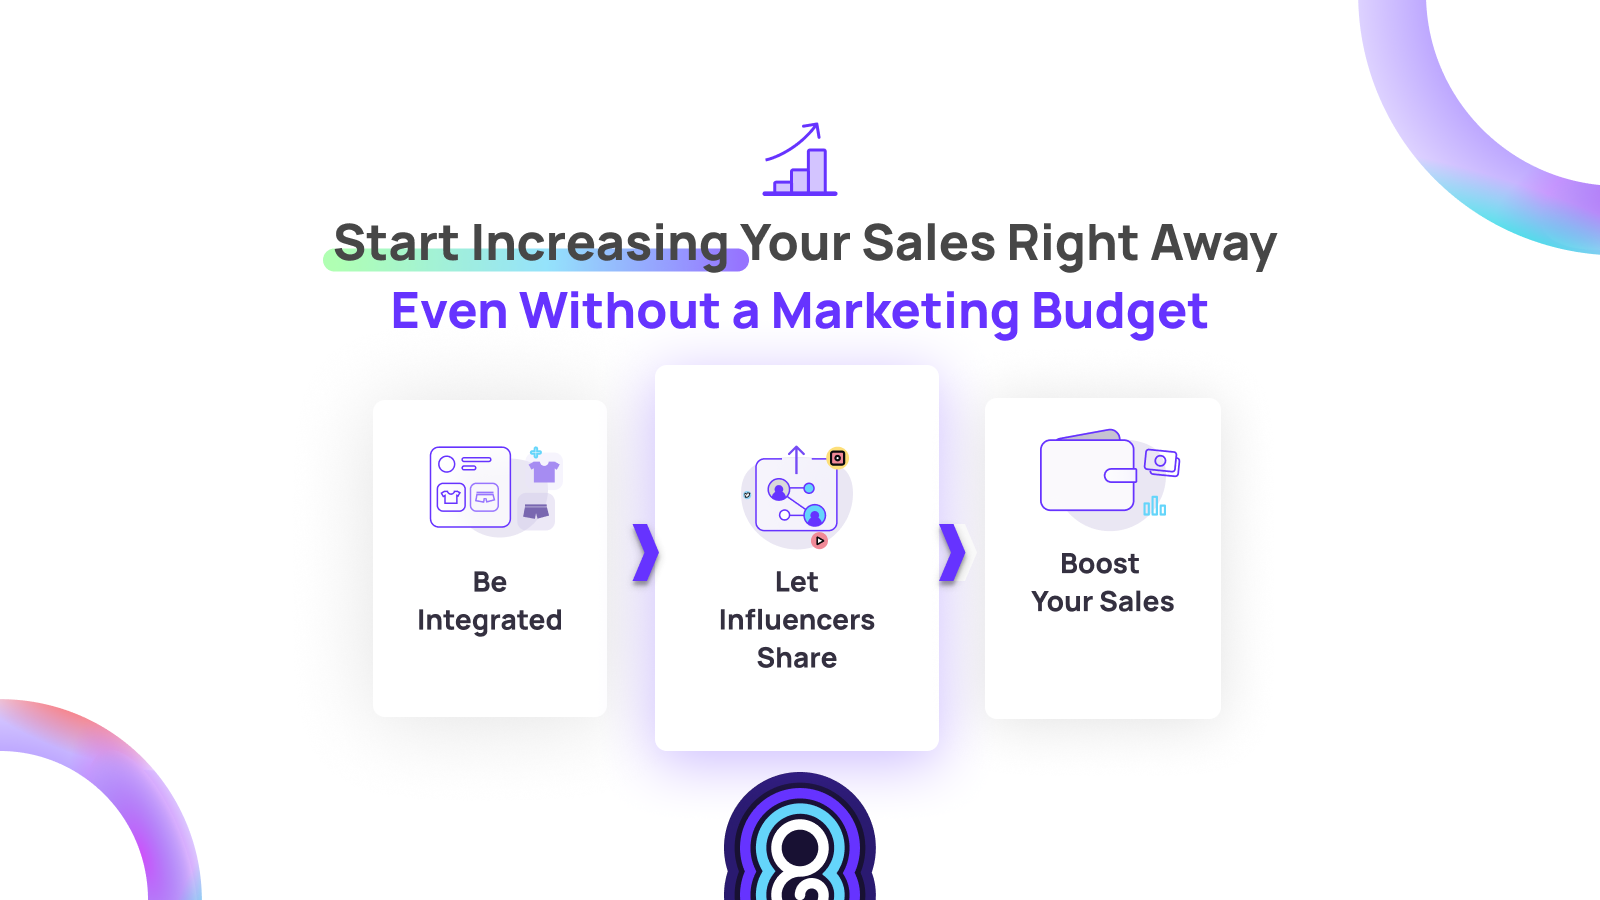 Start Increasing Your Sales Right Away, Even Without a Marketing